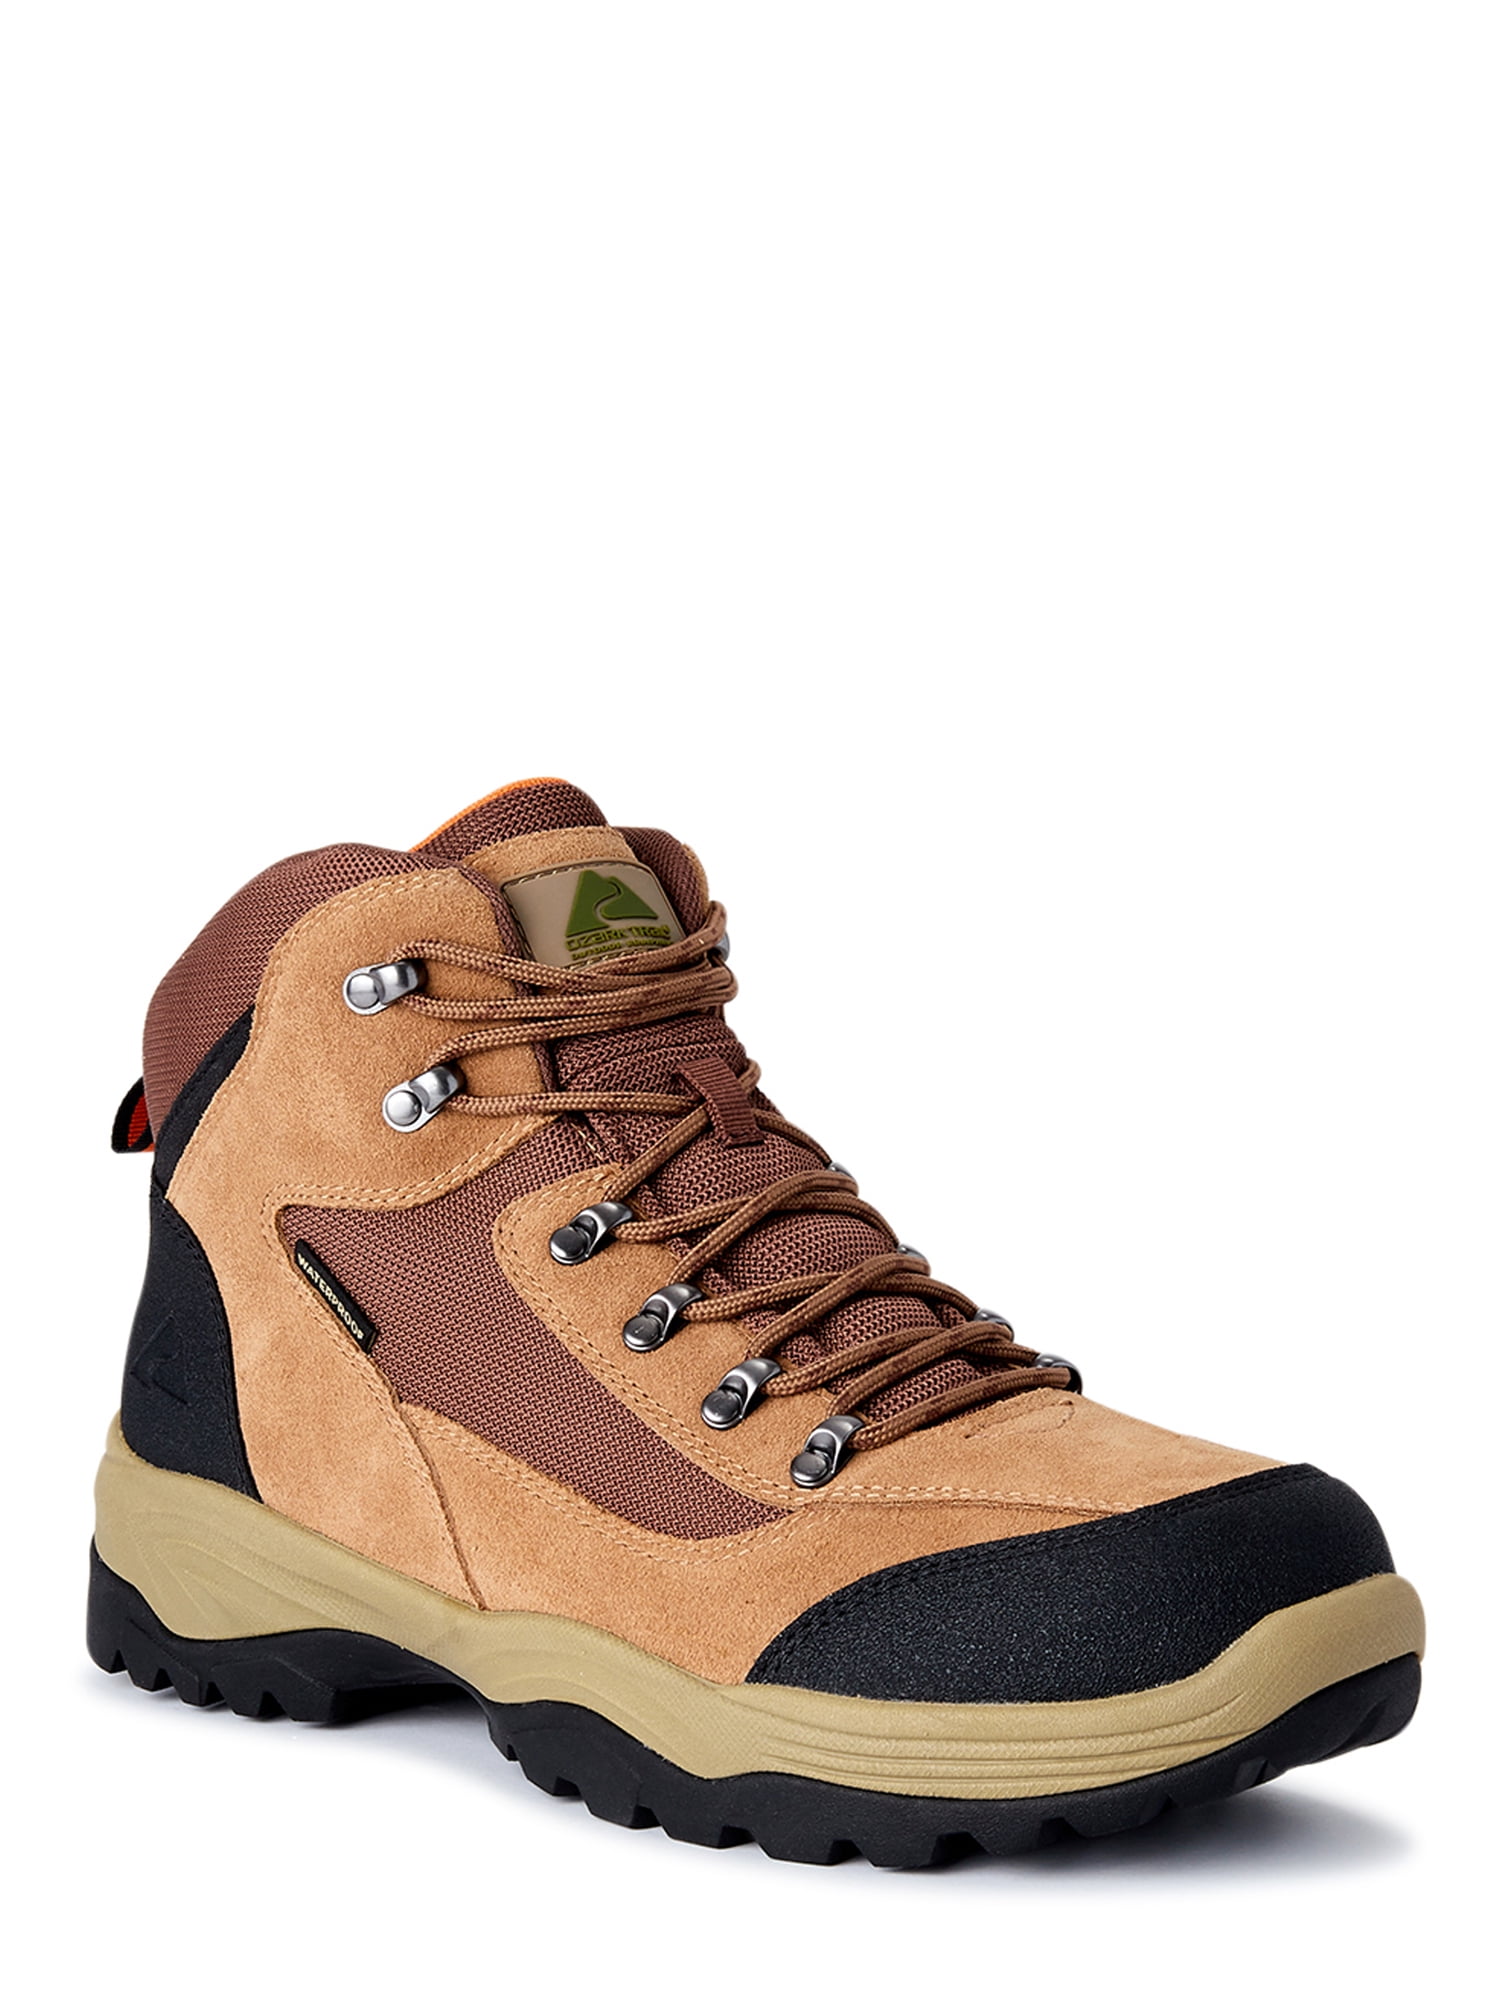 OZARK TRAIL Most Sizes PREMIUM HIKING BOOTS LEATHER-WATERPROOF-FLEXABLE MIDSOLE 